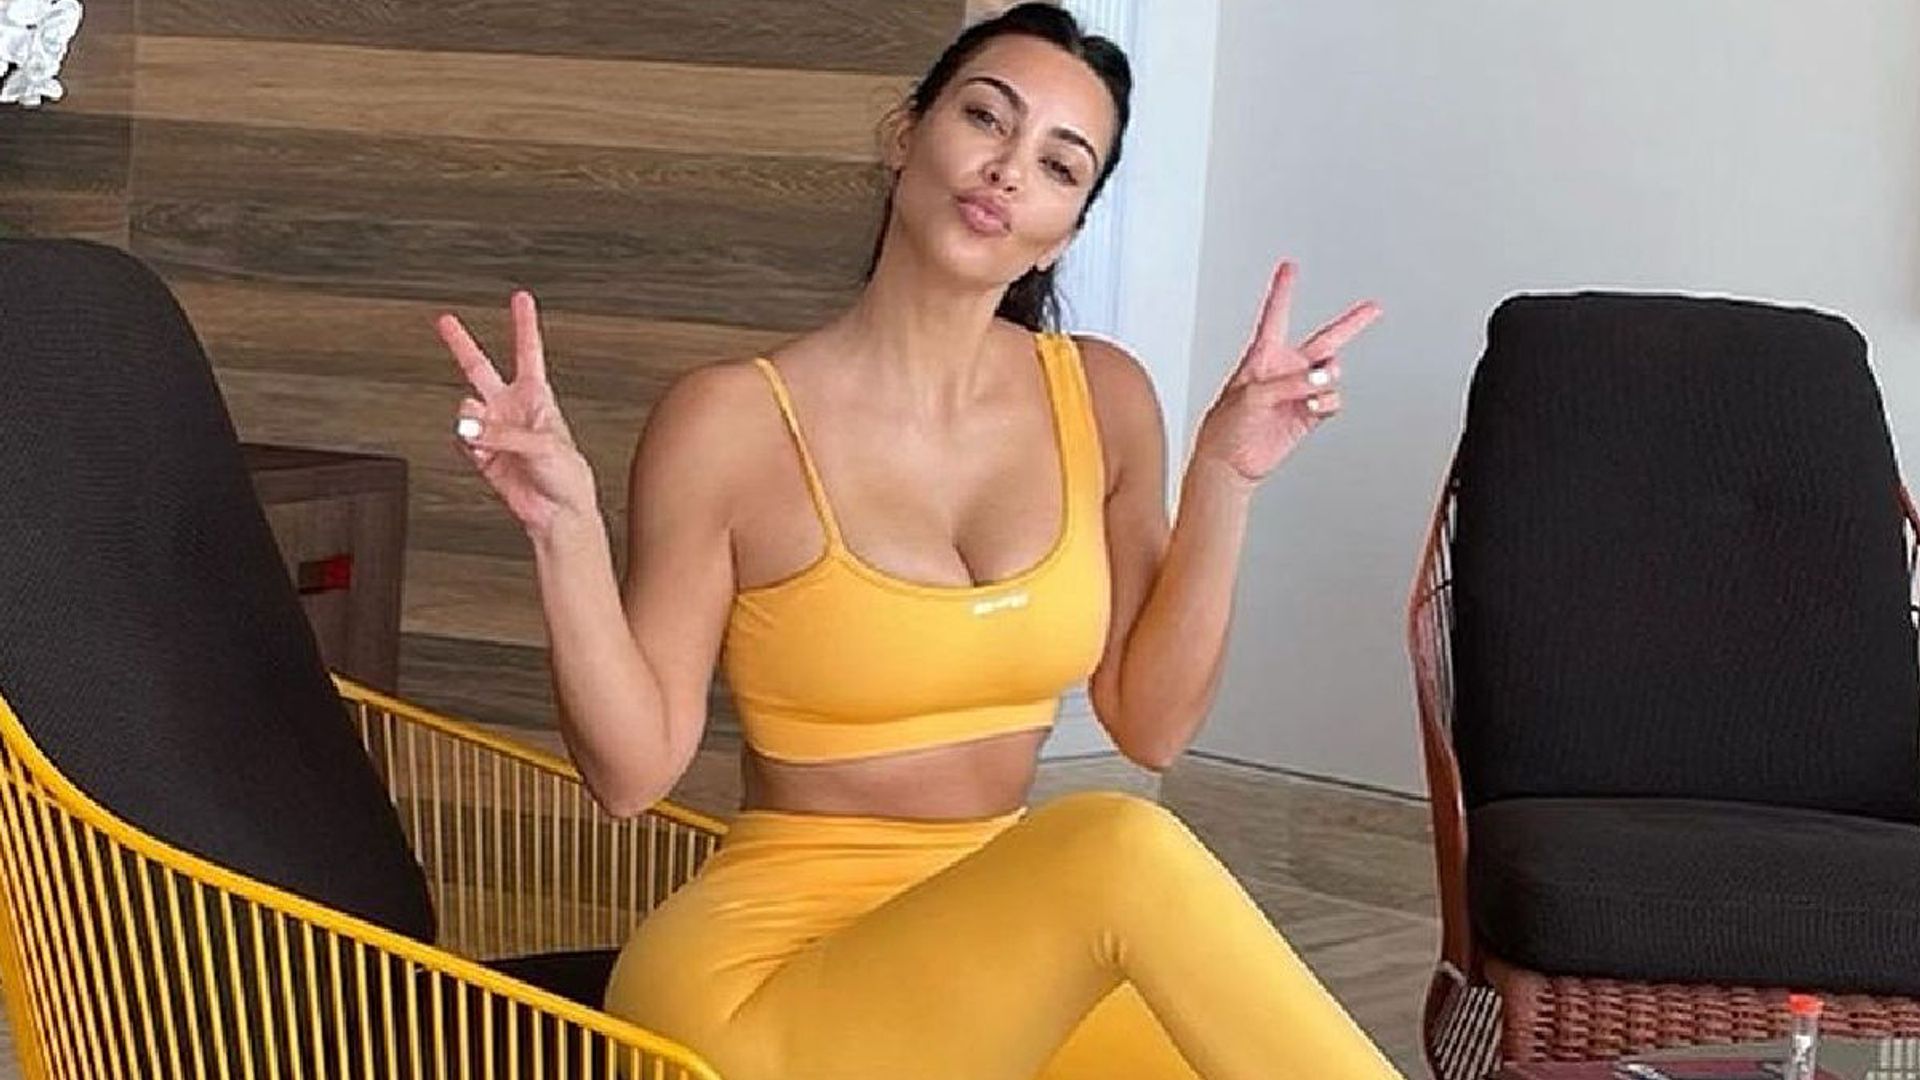 Kim Kardashian shows her curves - and rocks Kanye West's shoes - during Easter workout